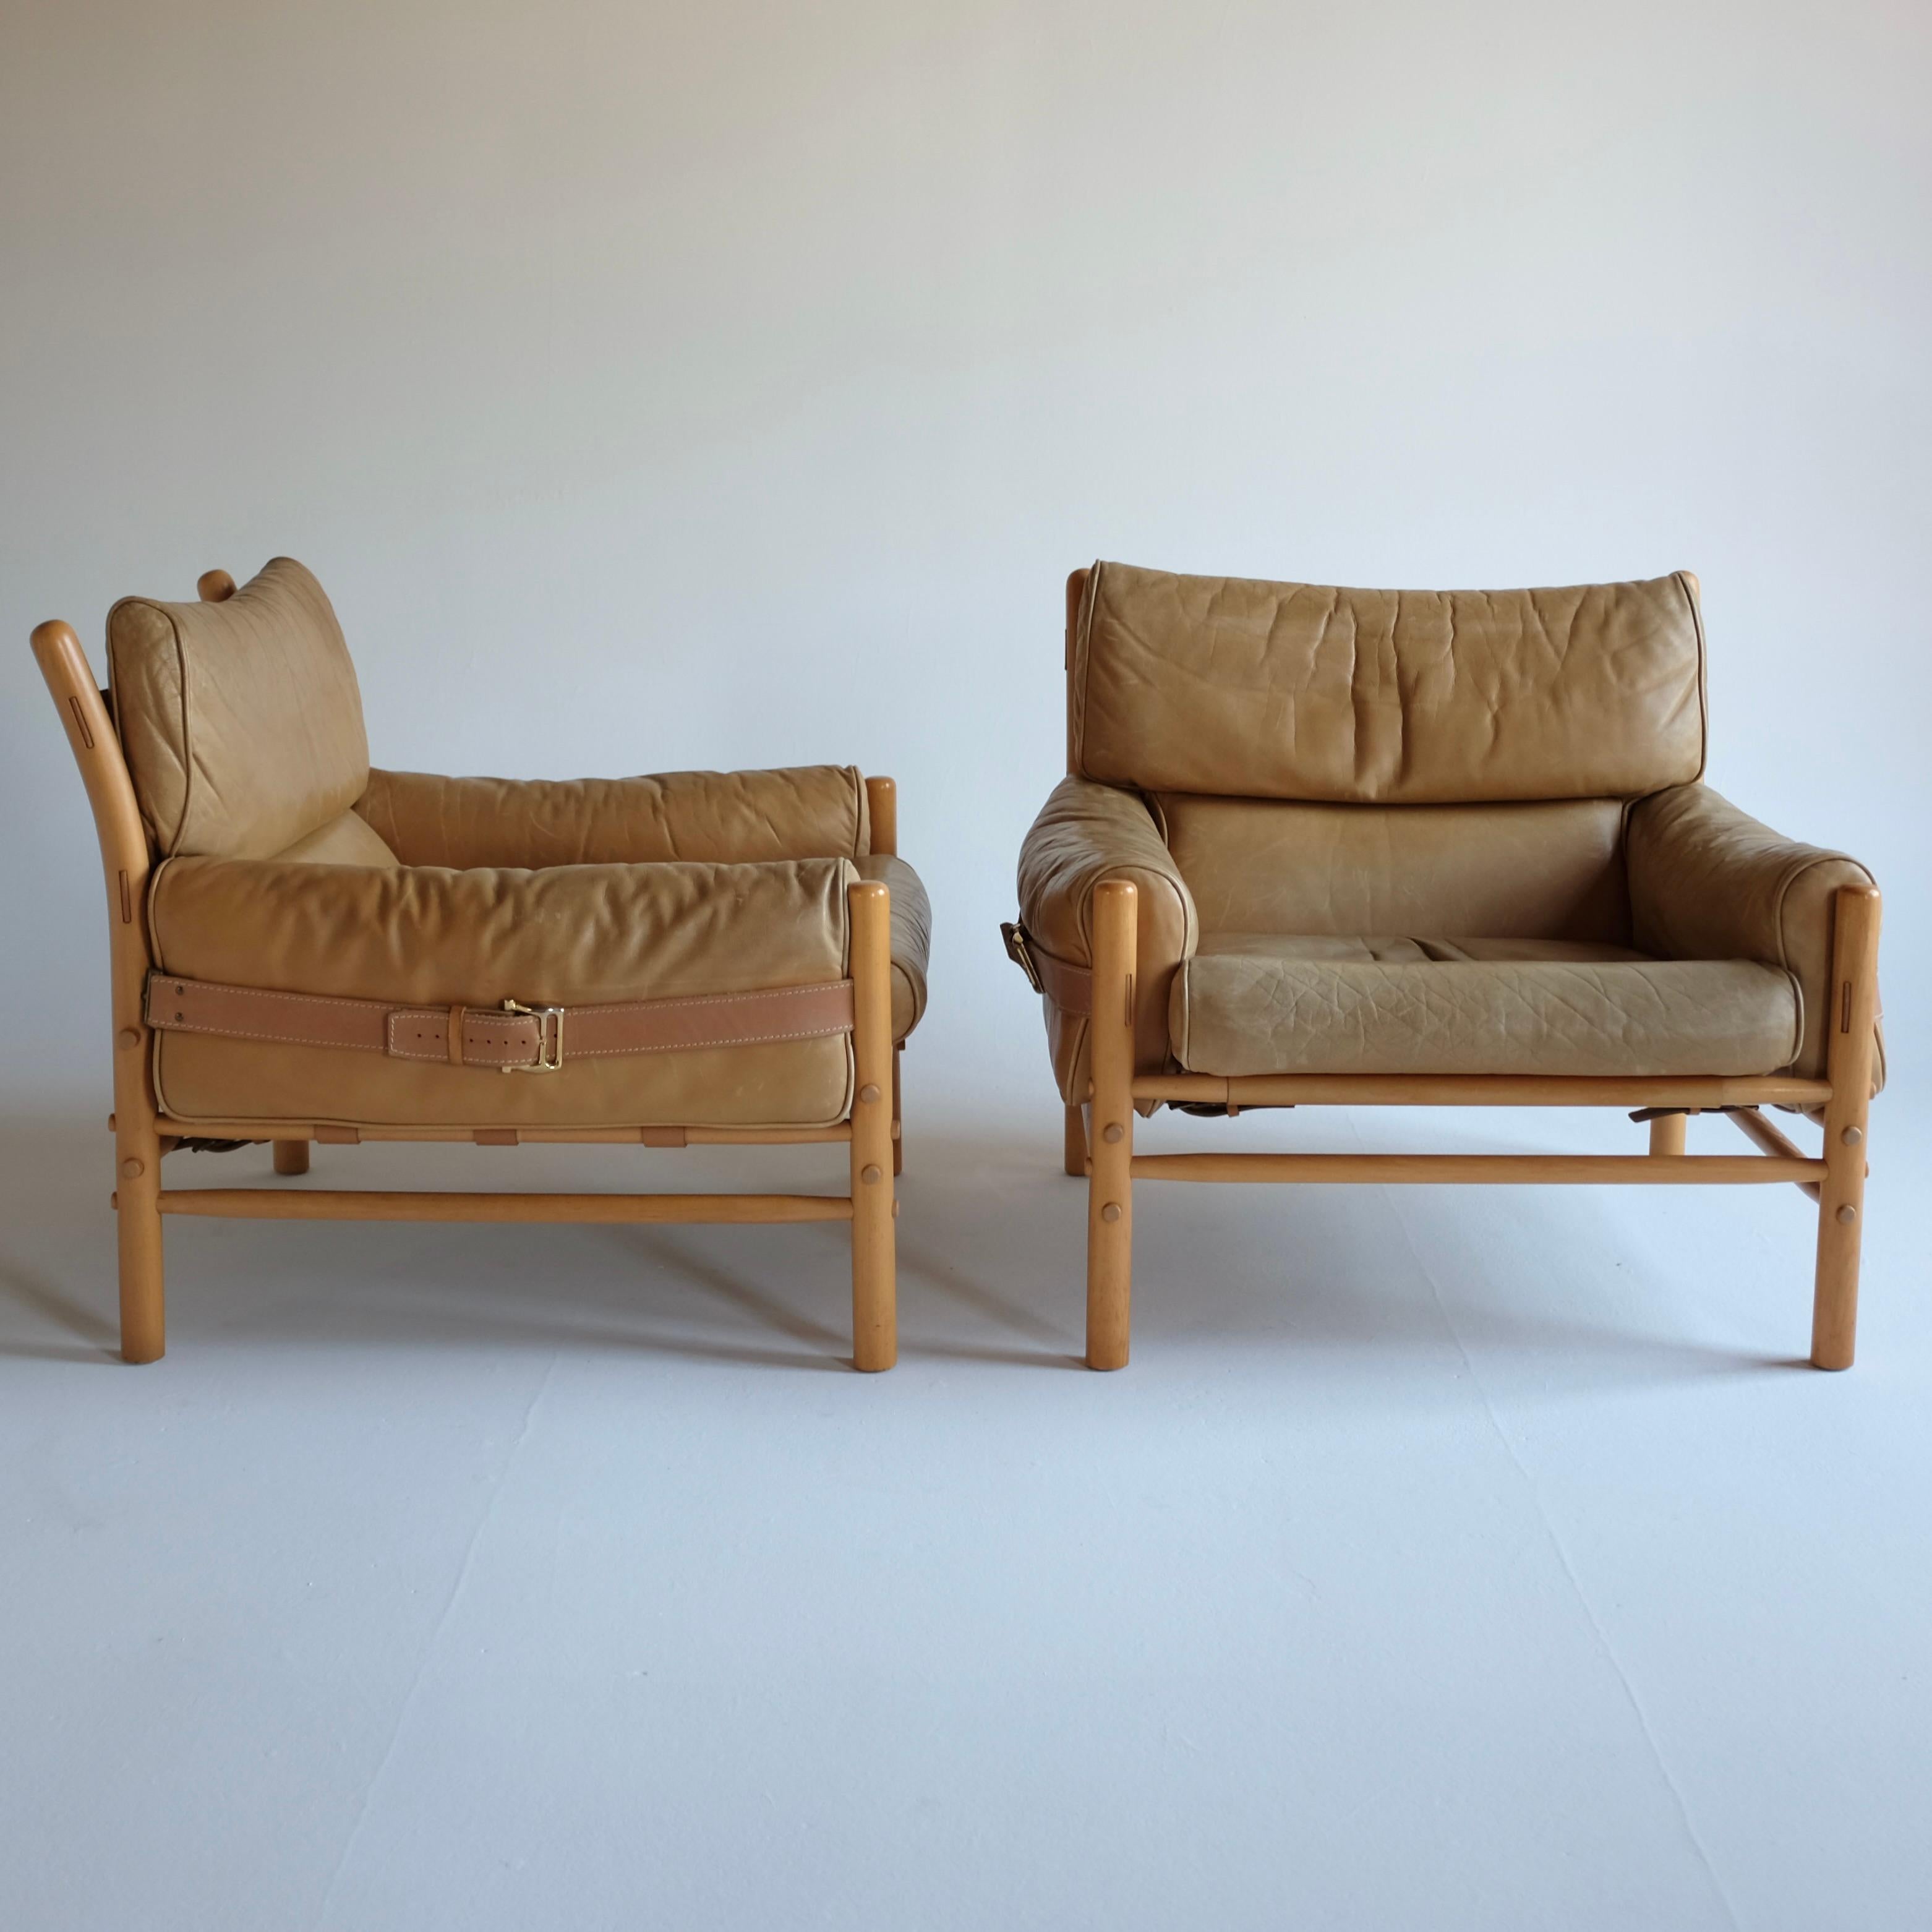 Pair of wood and leather Kontiki Chairs by Arne Norell for his namesake company in Sweden. Arne Norell designs are renowned for their comfort and ease, especially visible in these Kontiki lounge chairs. Decorative details with brass buckles and